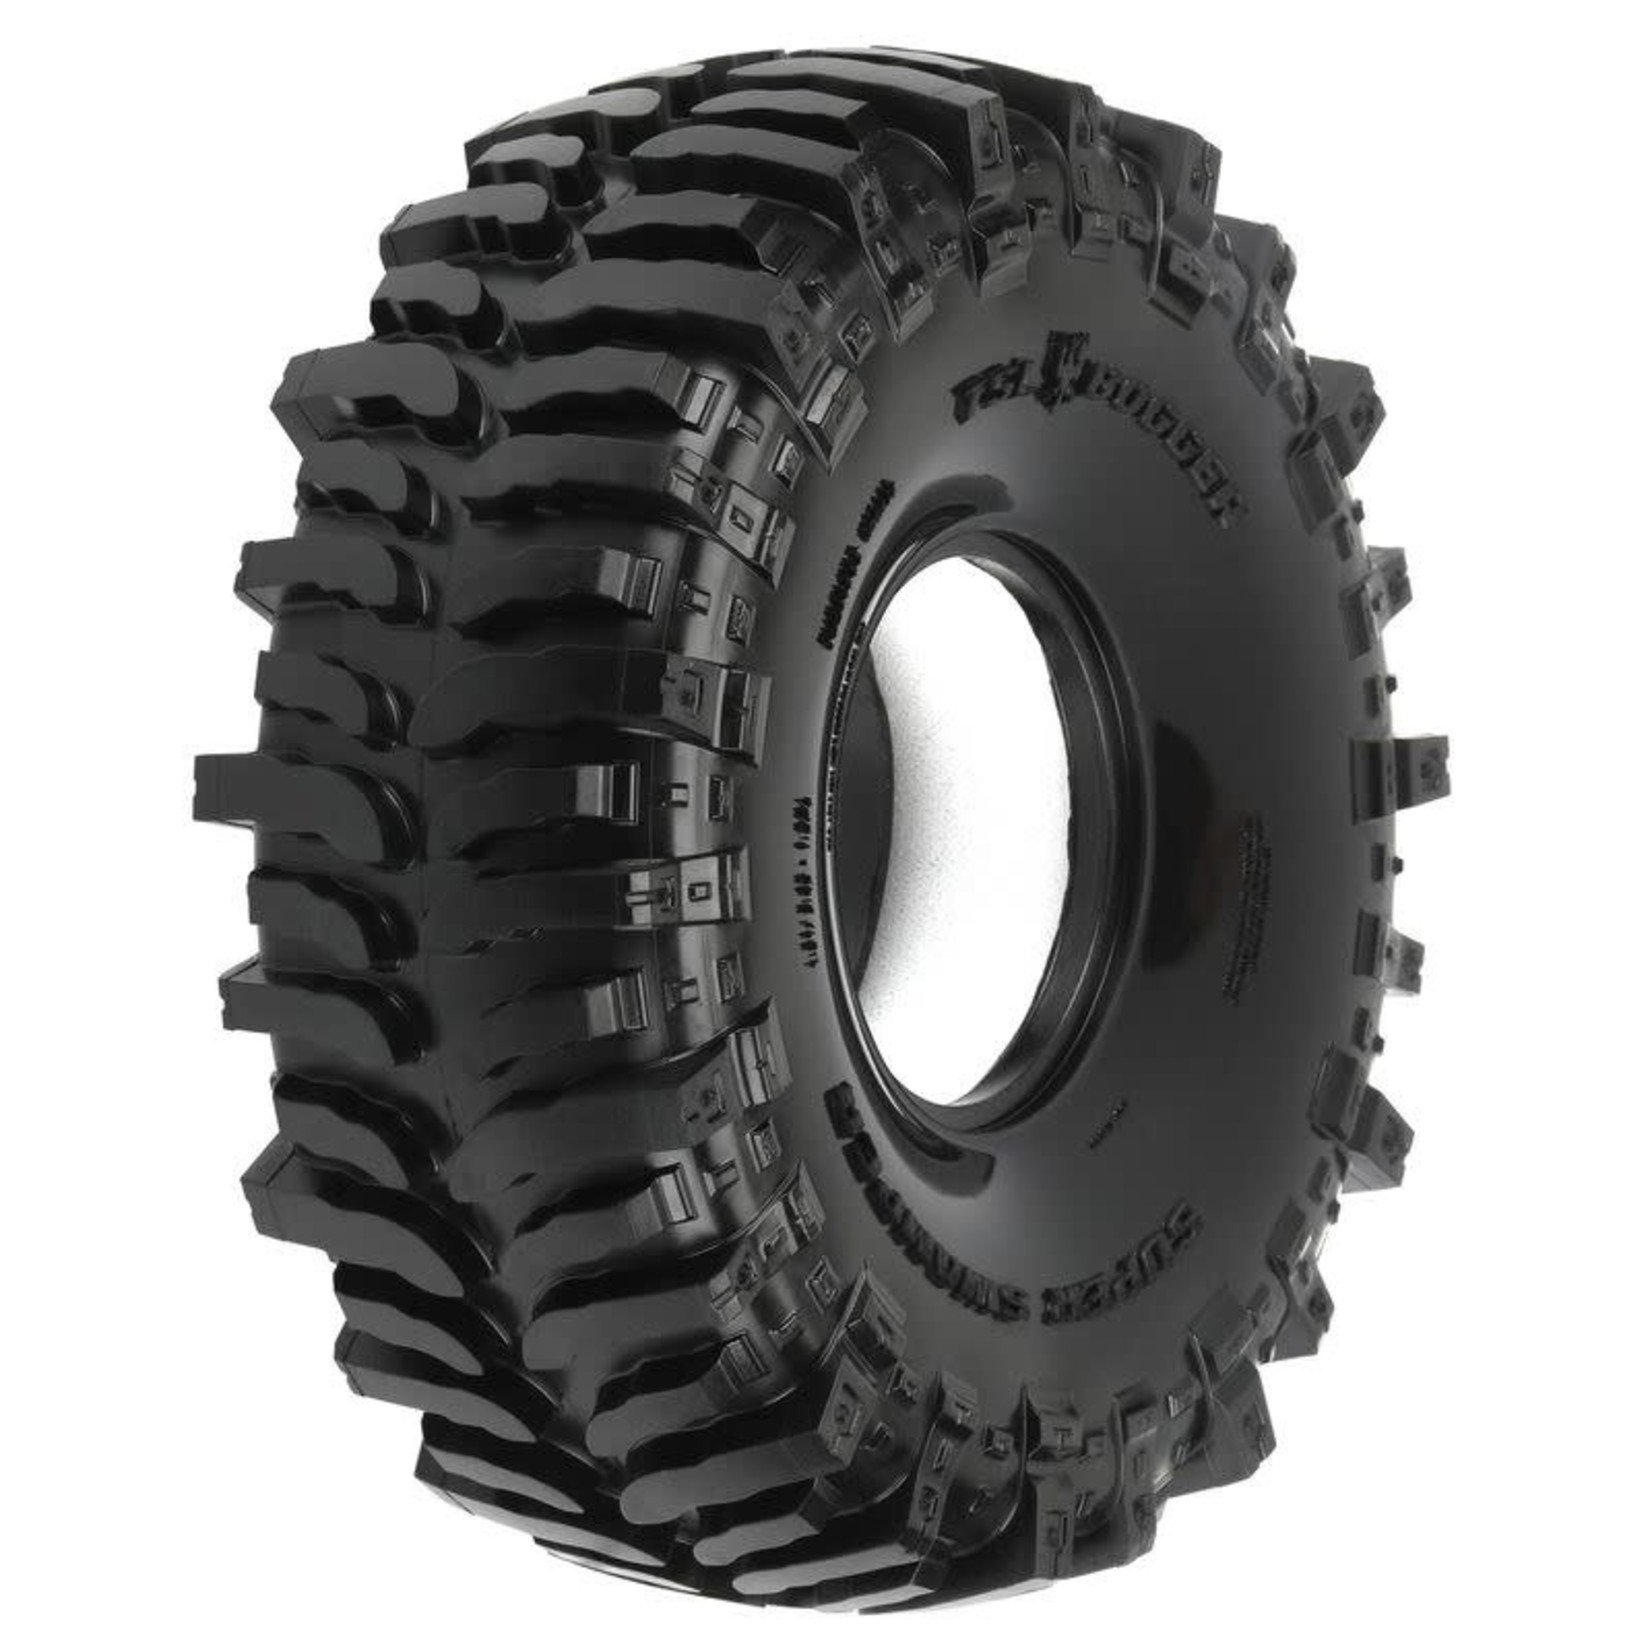 Pro-line Racing PRO1013314 Pro-Line 1/10 Interco Bogger G8 Front/Rear 1.9" Rock Crawling Tires (2)